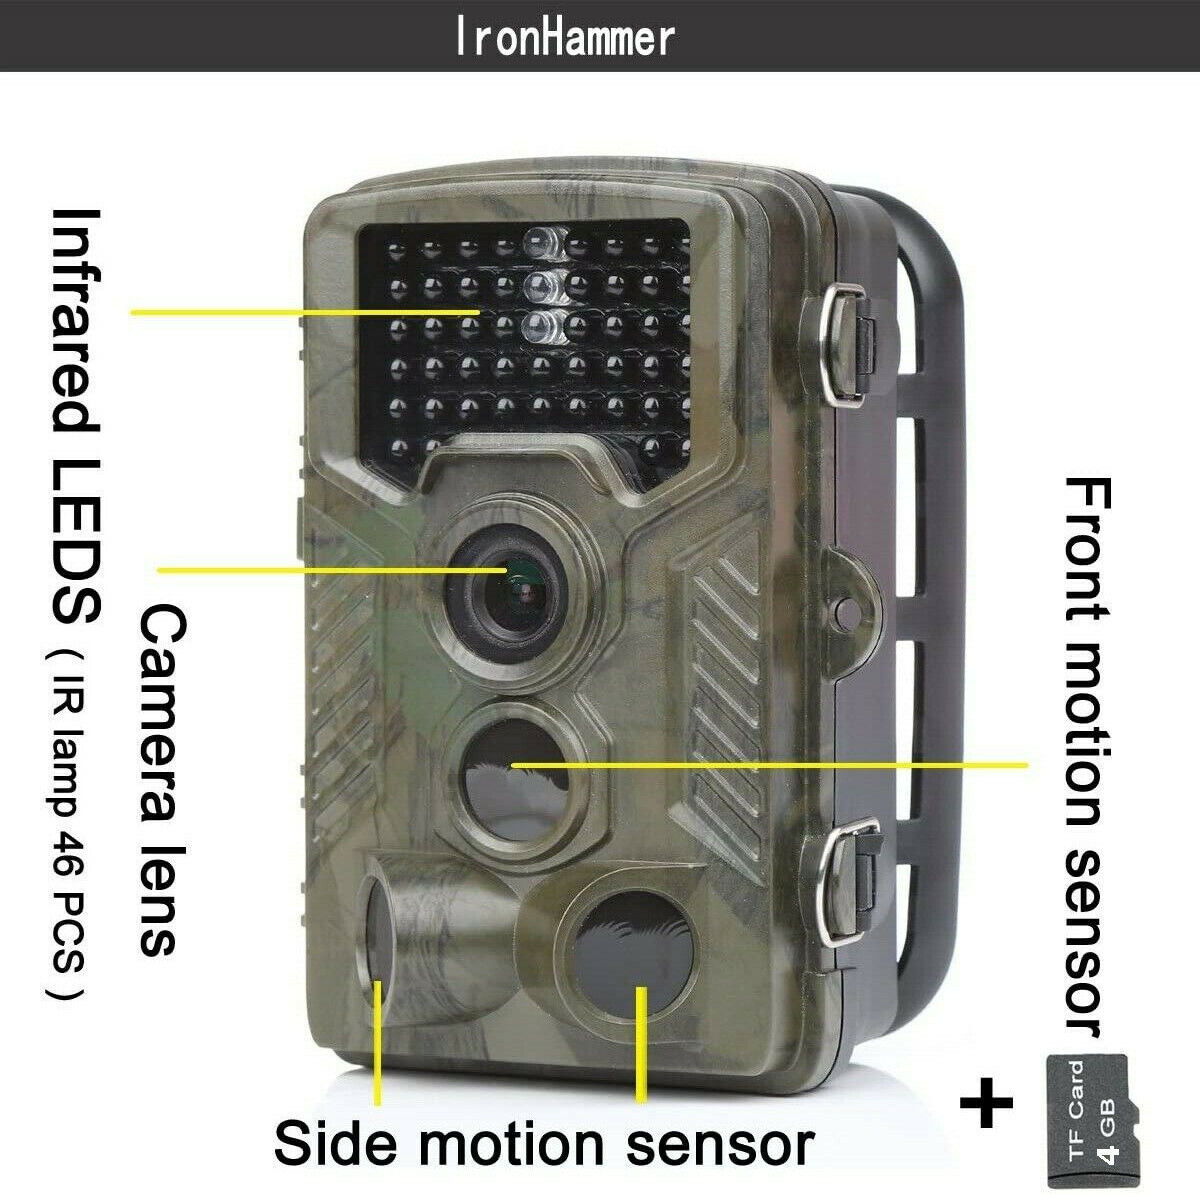 Iron Hammer Digital Trail Camera Hunting Game Scouting, 12MP 2.4in TFT, Open Box